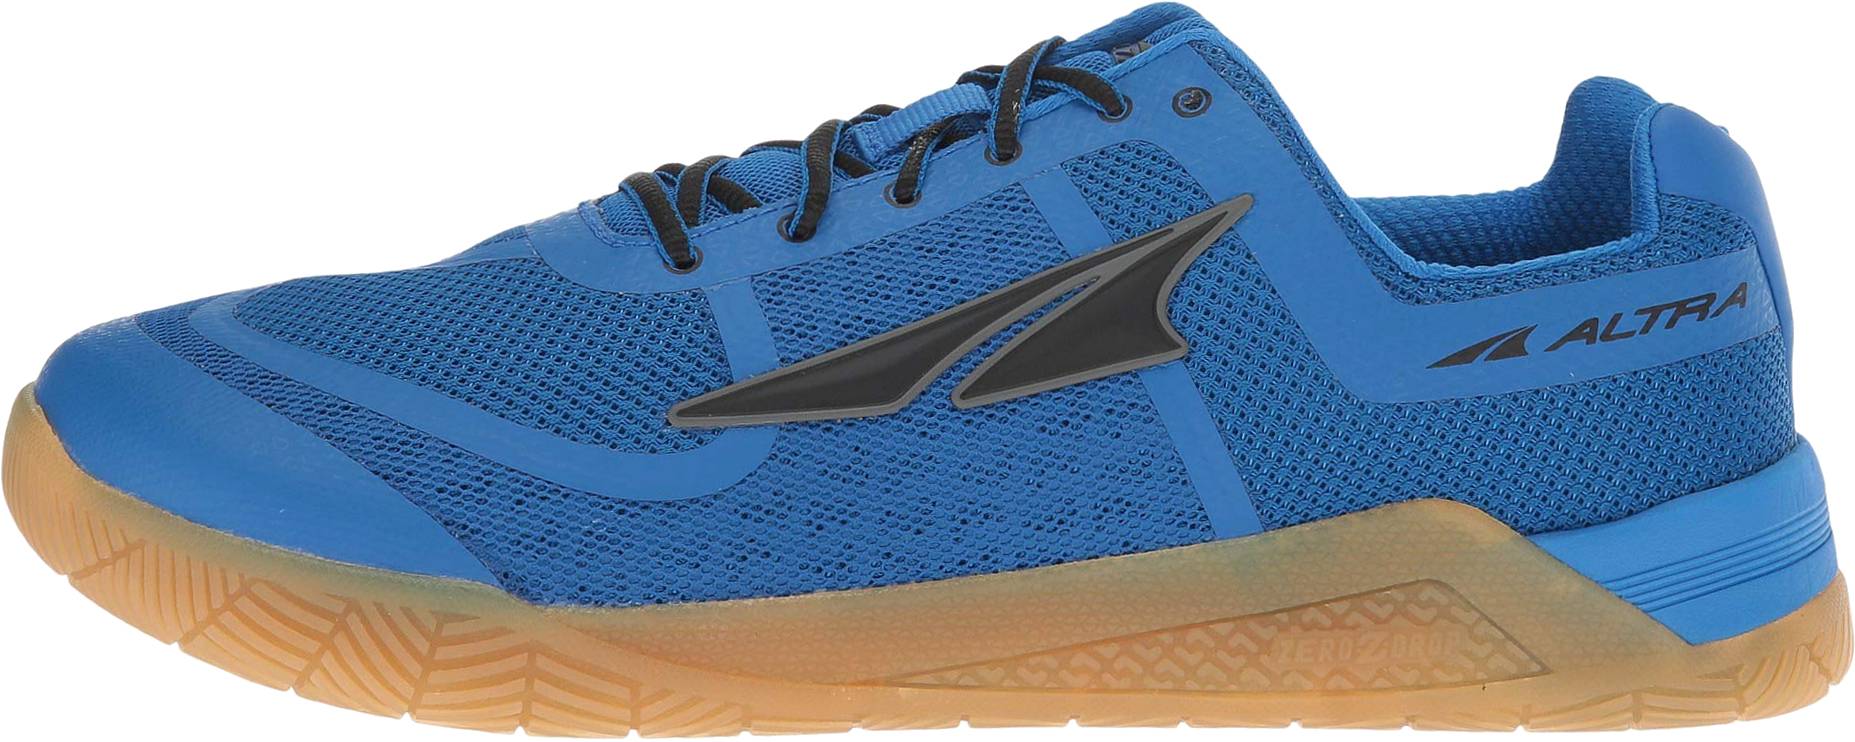 $130 + Review of Altra HIIT XT 1.5 